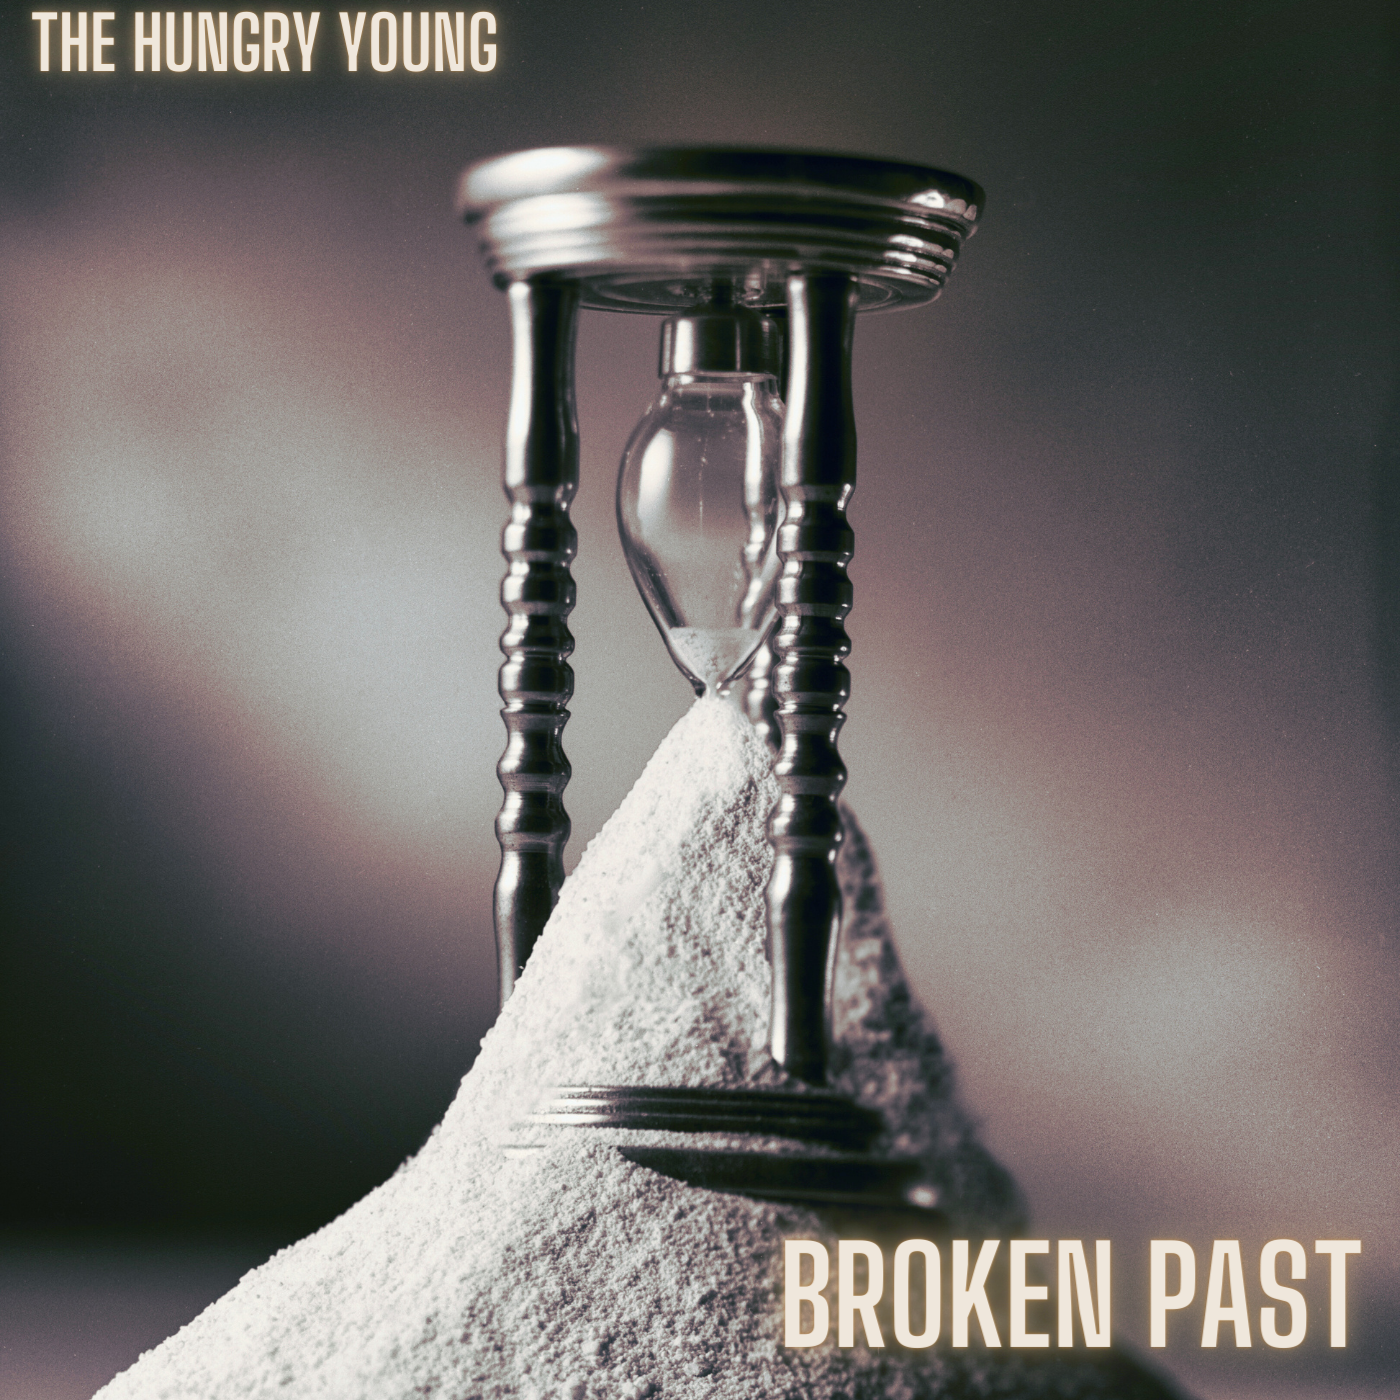 Broken Past by The Hungry Young, Album cover artwork